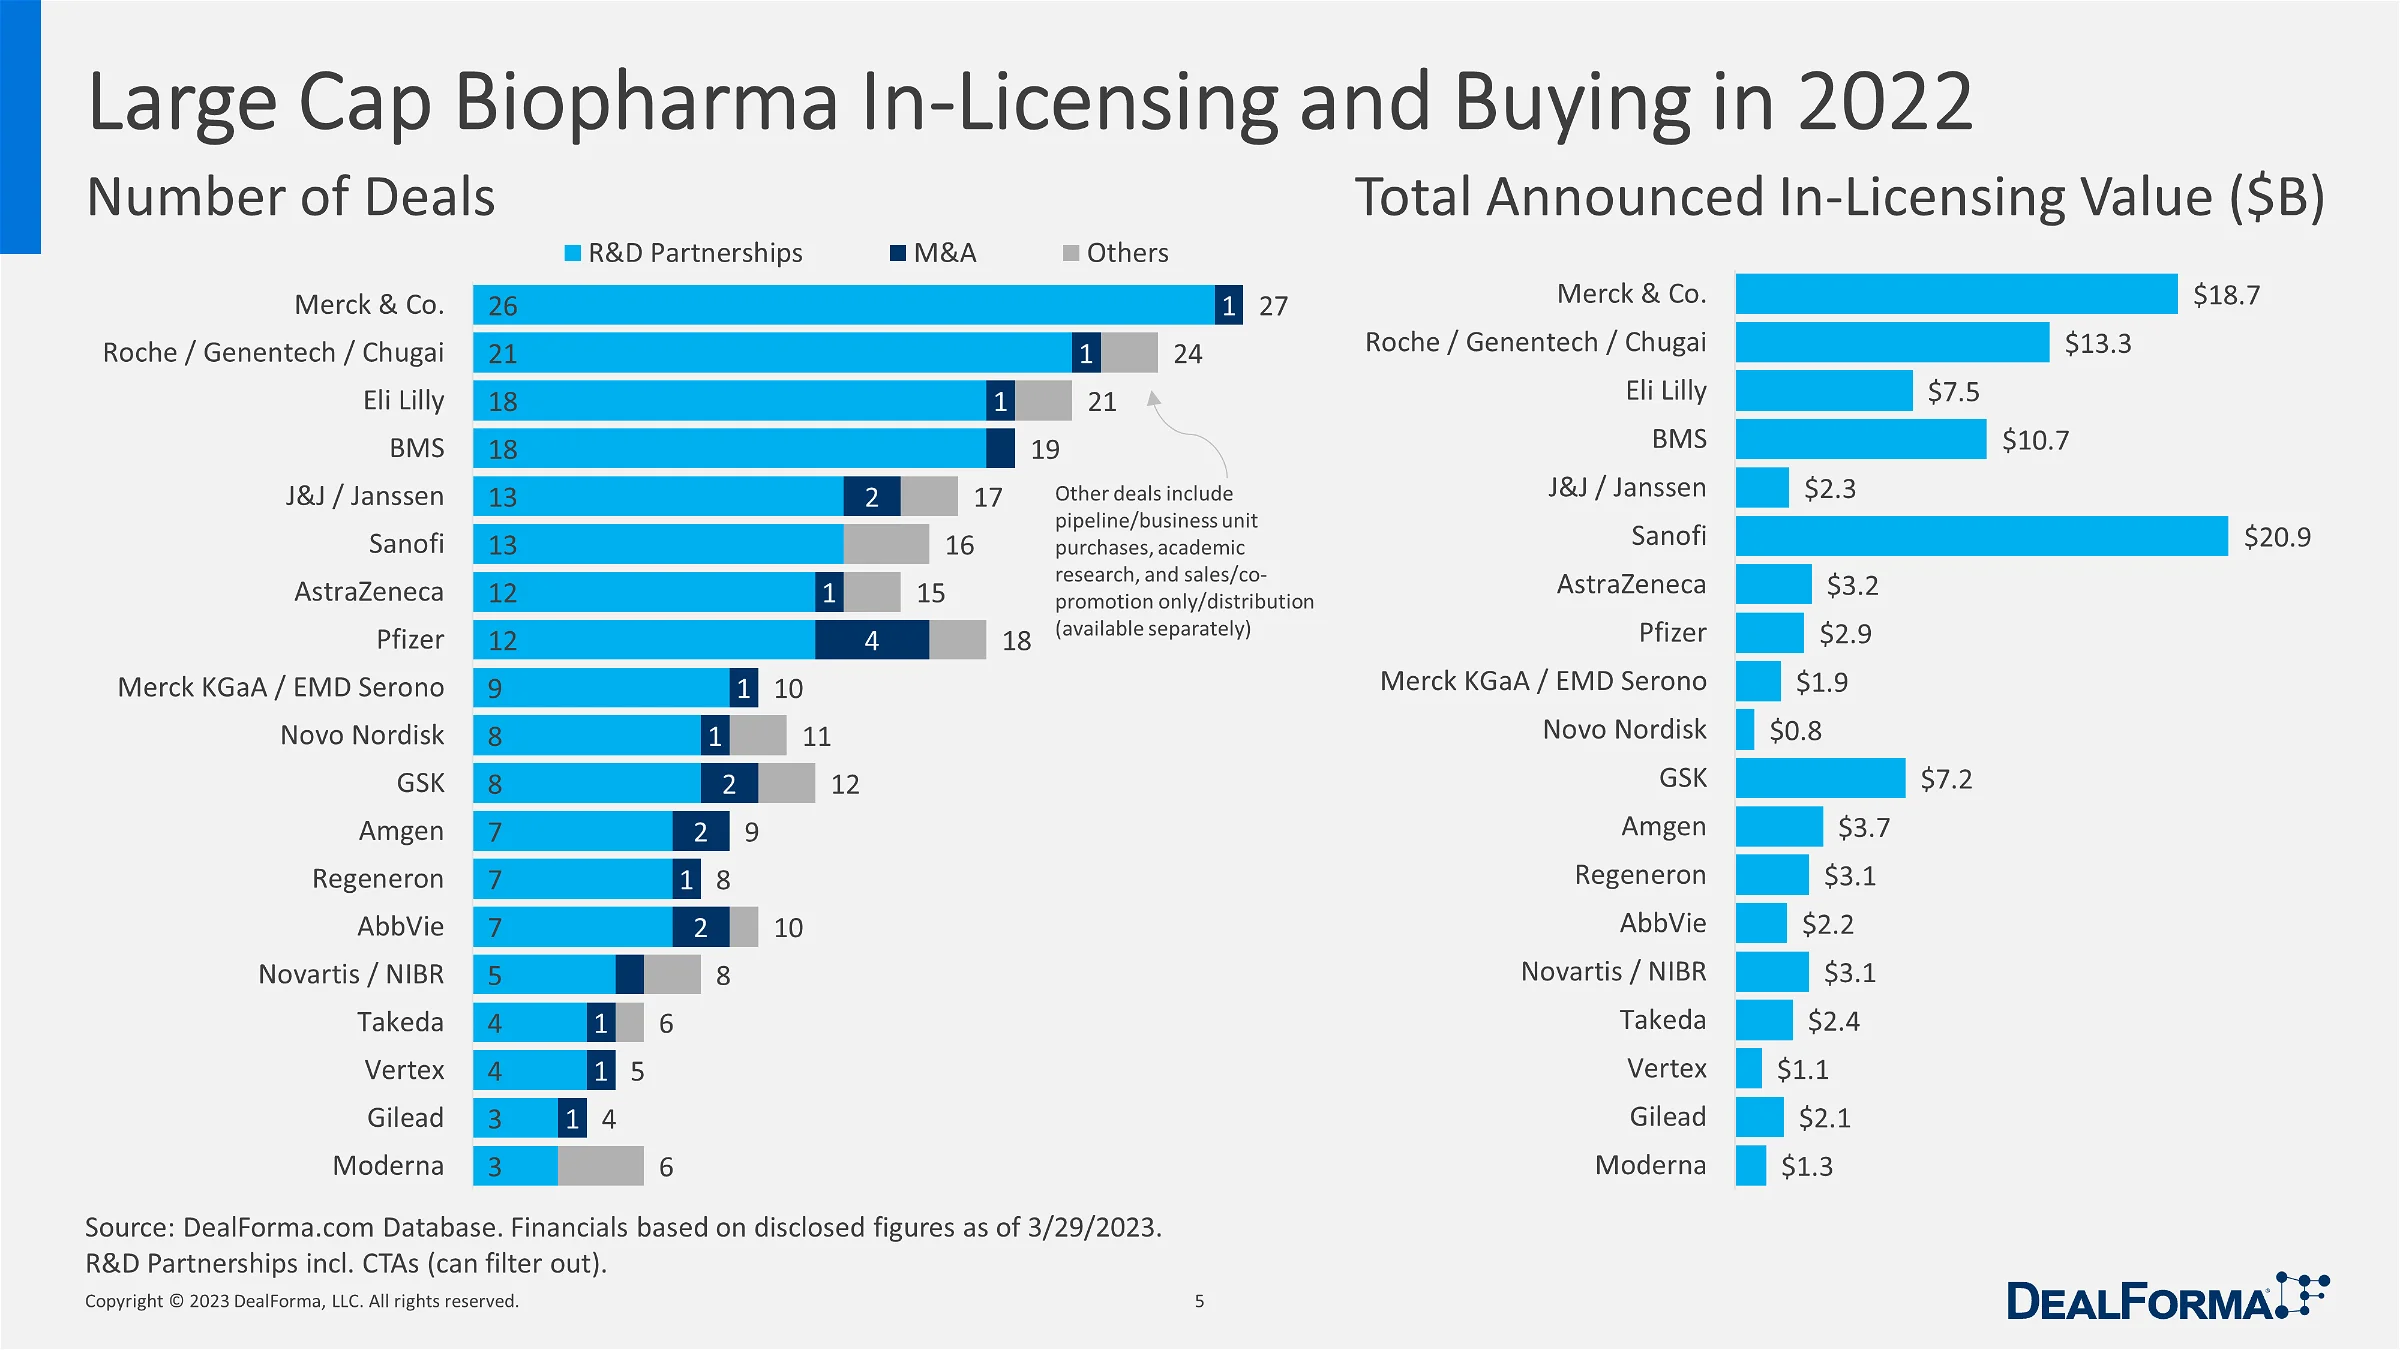 Large Cap Biopharma In Licensing and Buying in 2022